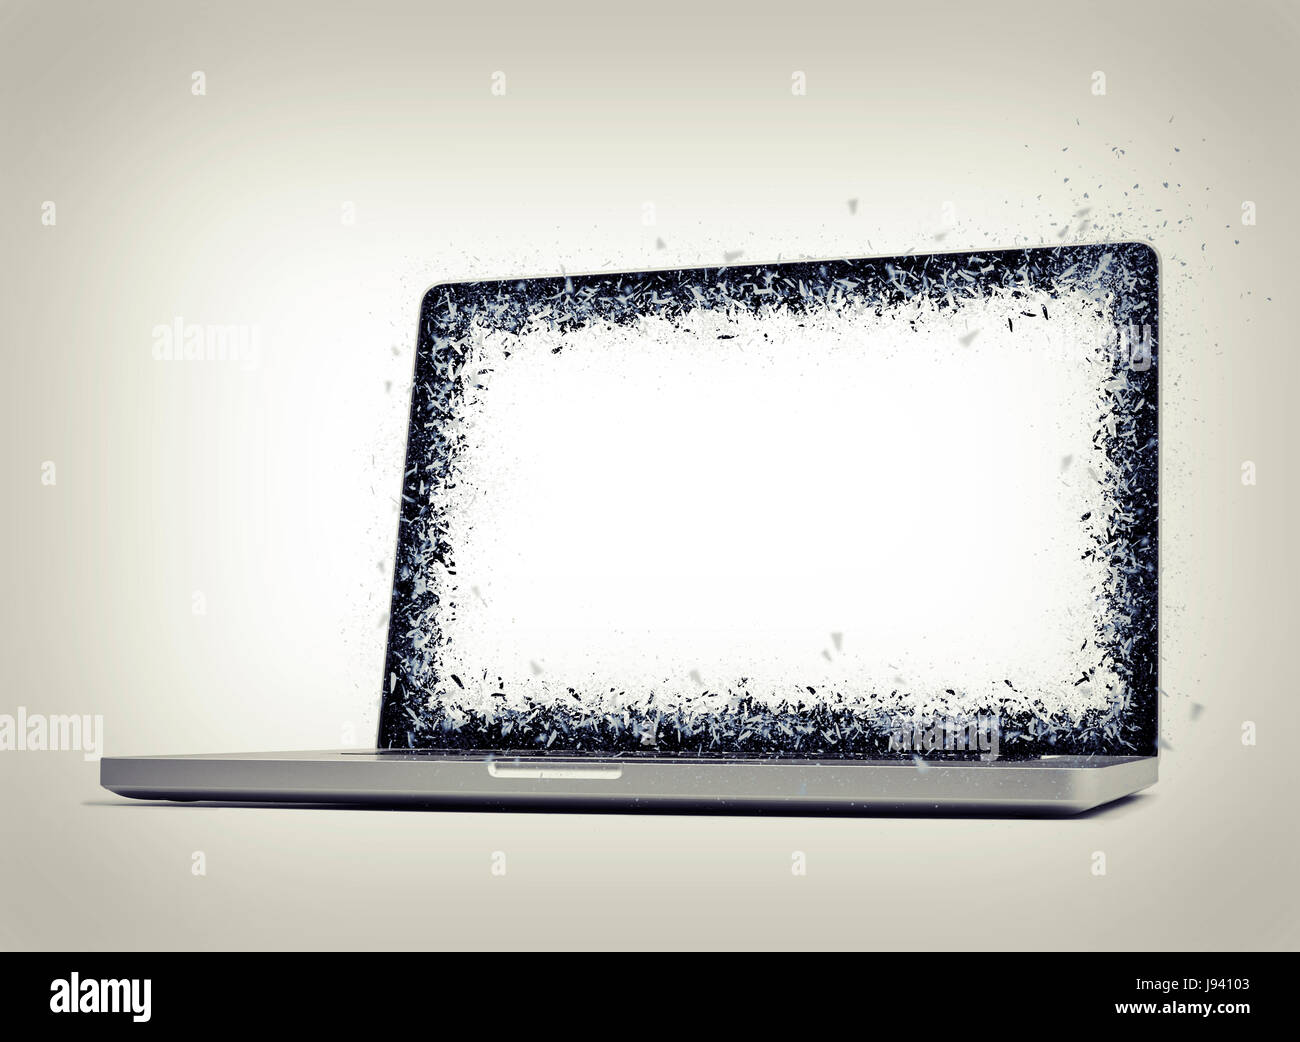 Screen from Laptop exploding and shattering on gradient background Stock Photo